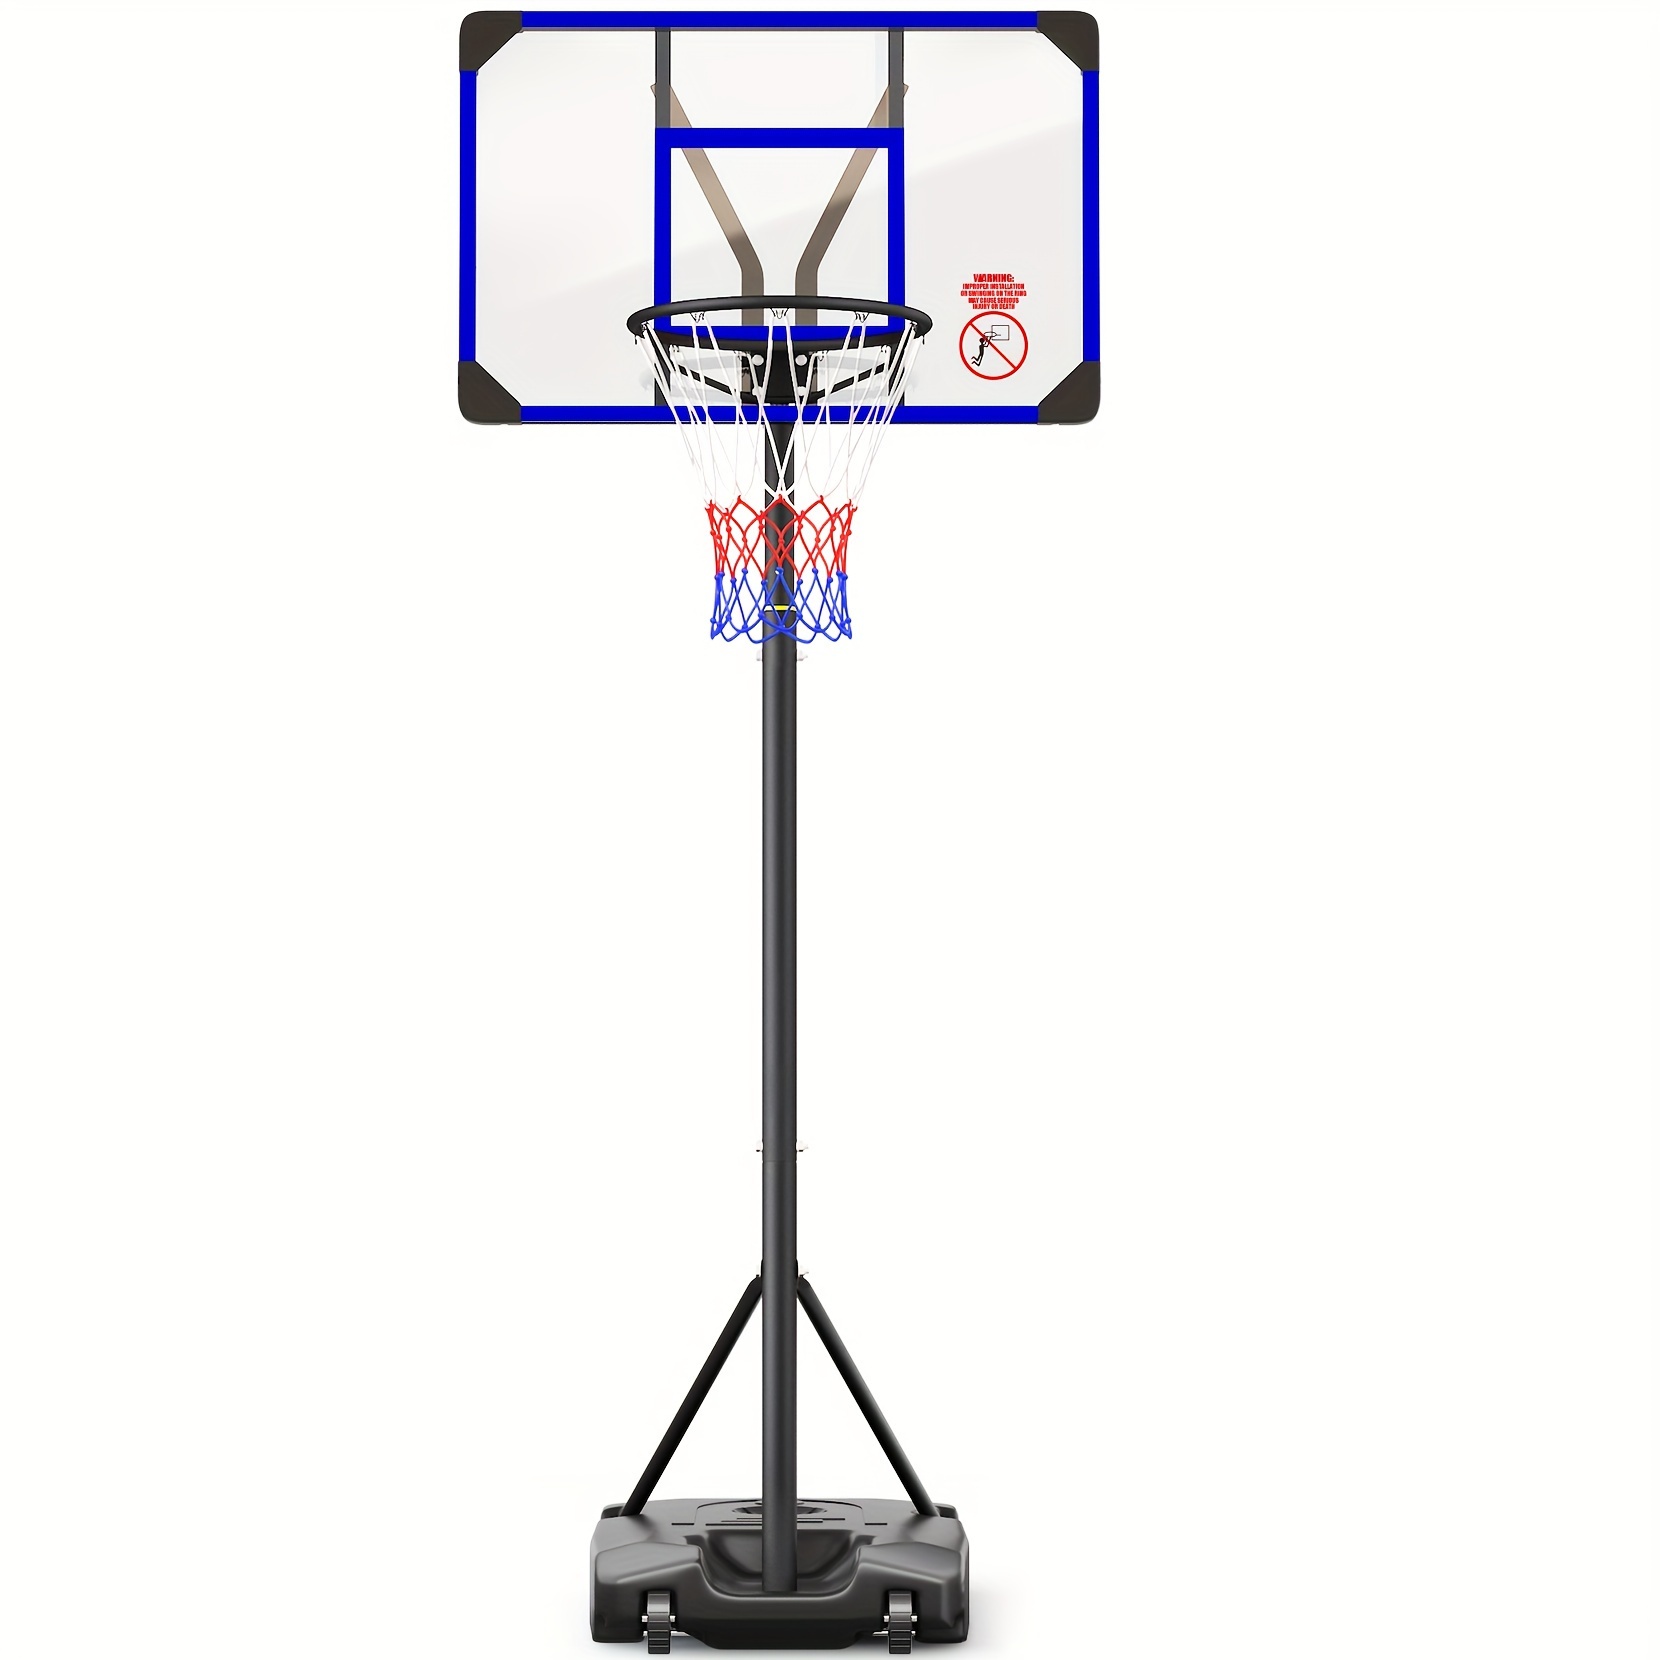 

Yohood Kids Basketball Hoop 4.52-8.53ft Adjustable Height, Portable Basketball Goal System 32in Pc Backboard For Kids/adults Over 6 Years Old Indoor Outdoor, Enlarged Base With 2 Wheels